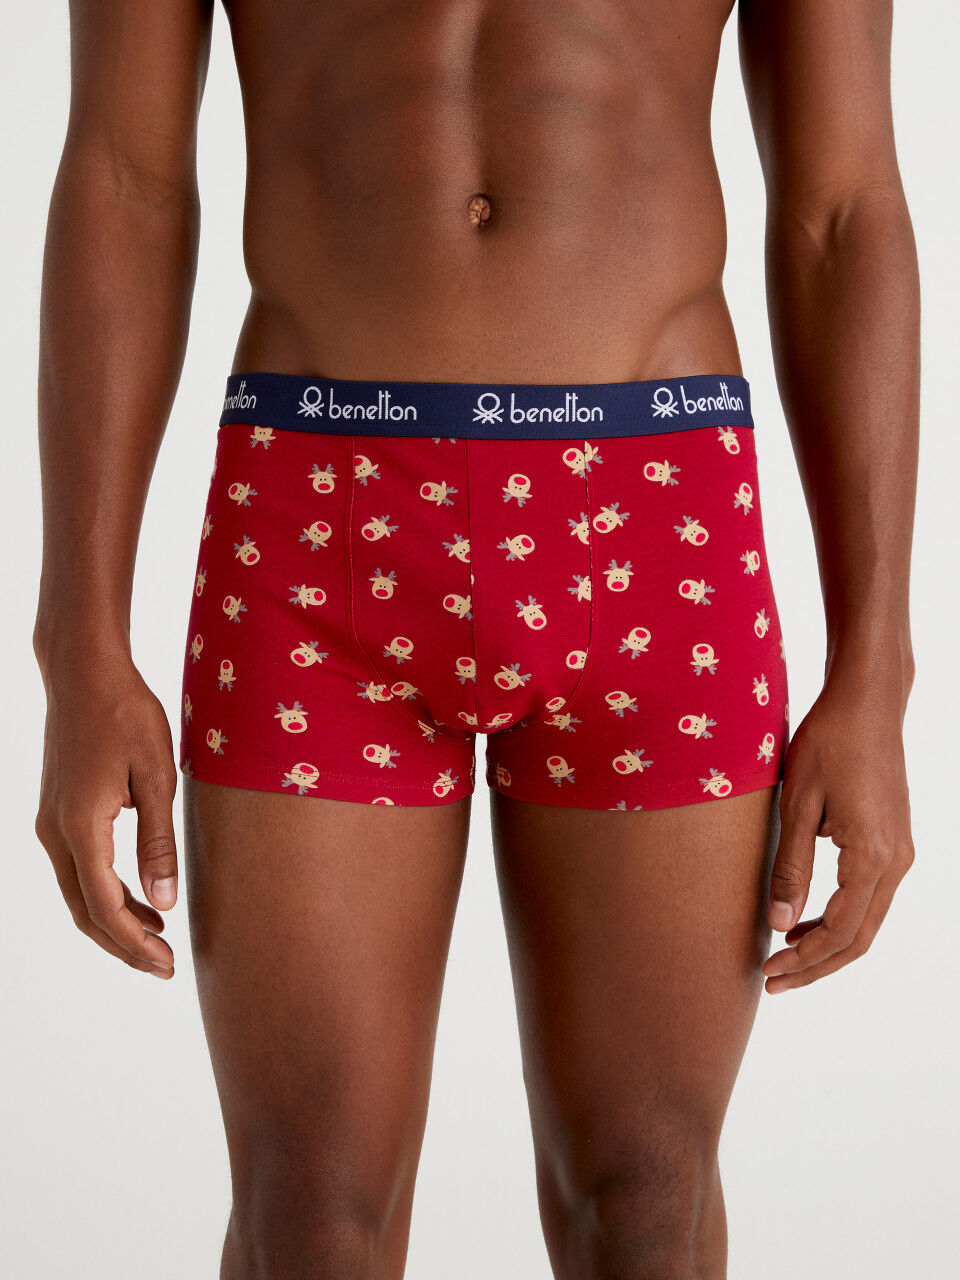 Mr Price  Mens underwear  Boxers briefs hipster trunks  South Africa